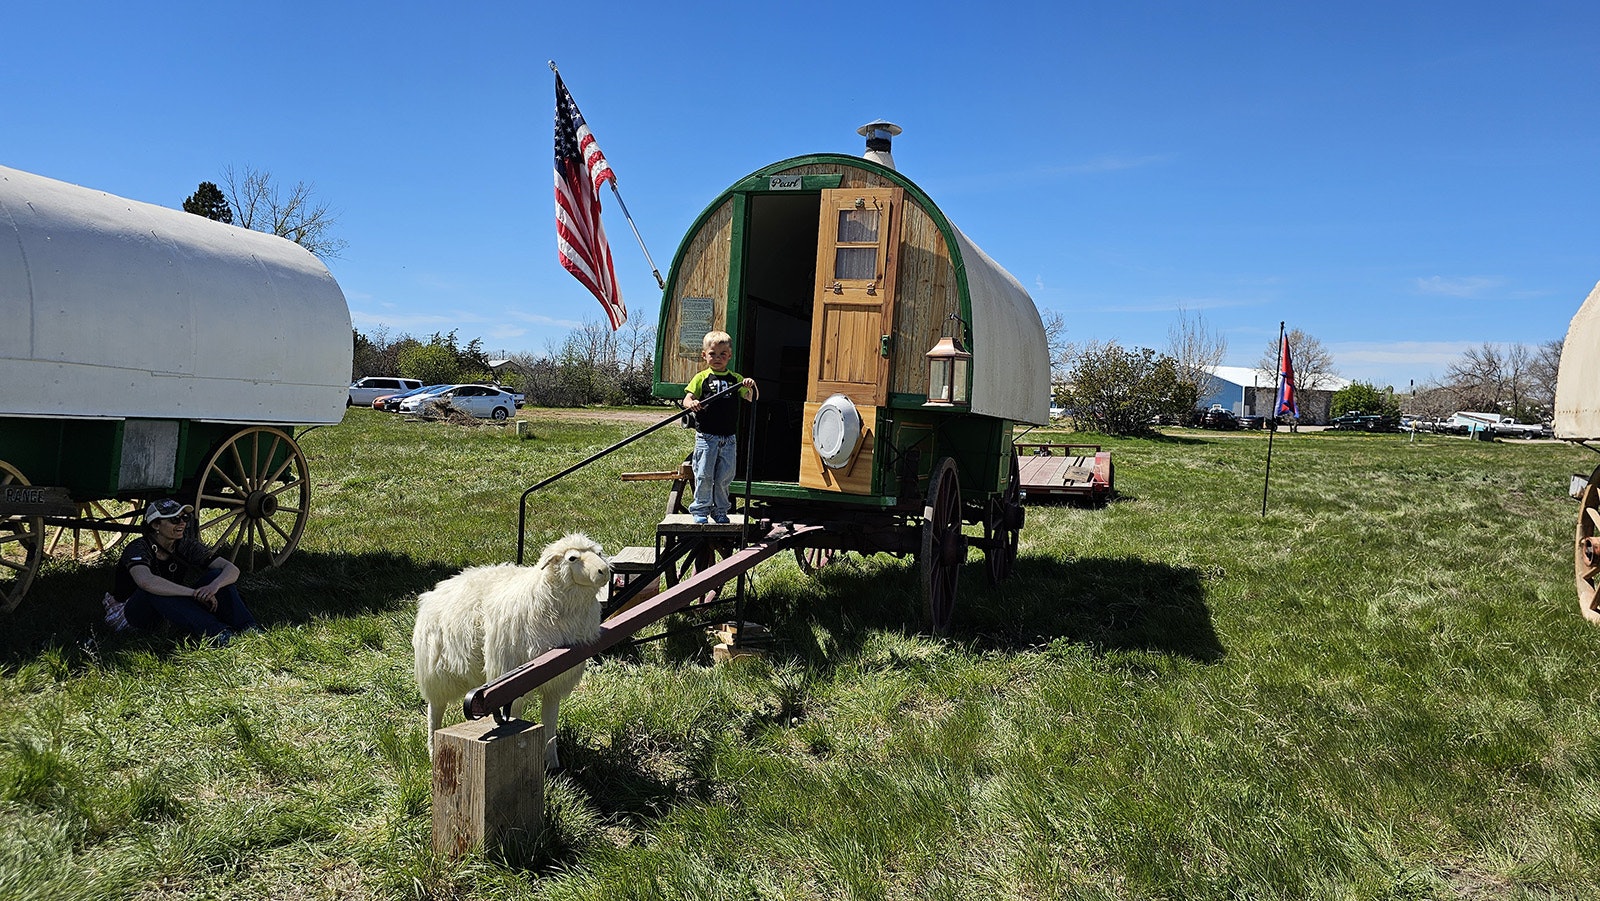 Sage Walker checks out The Pearl, a sheep wagon owned and restored by Doug Mikkelsen, while mom Jenna Walker looks on. The wagon was one of nine on display at Gillette's third annual Sheepwagon festival.